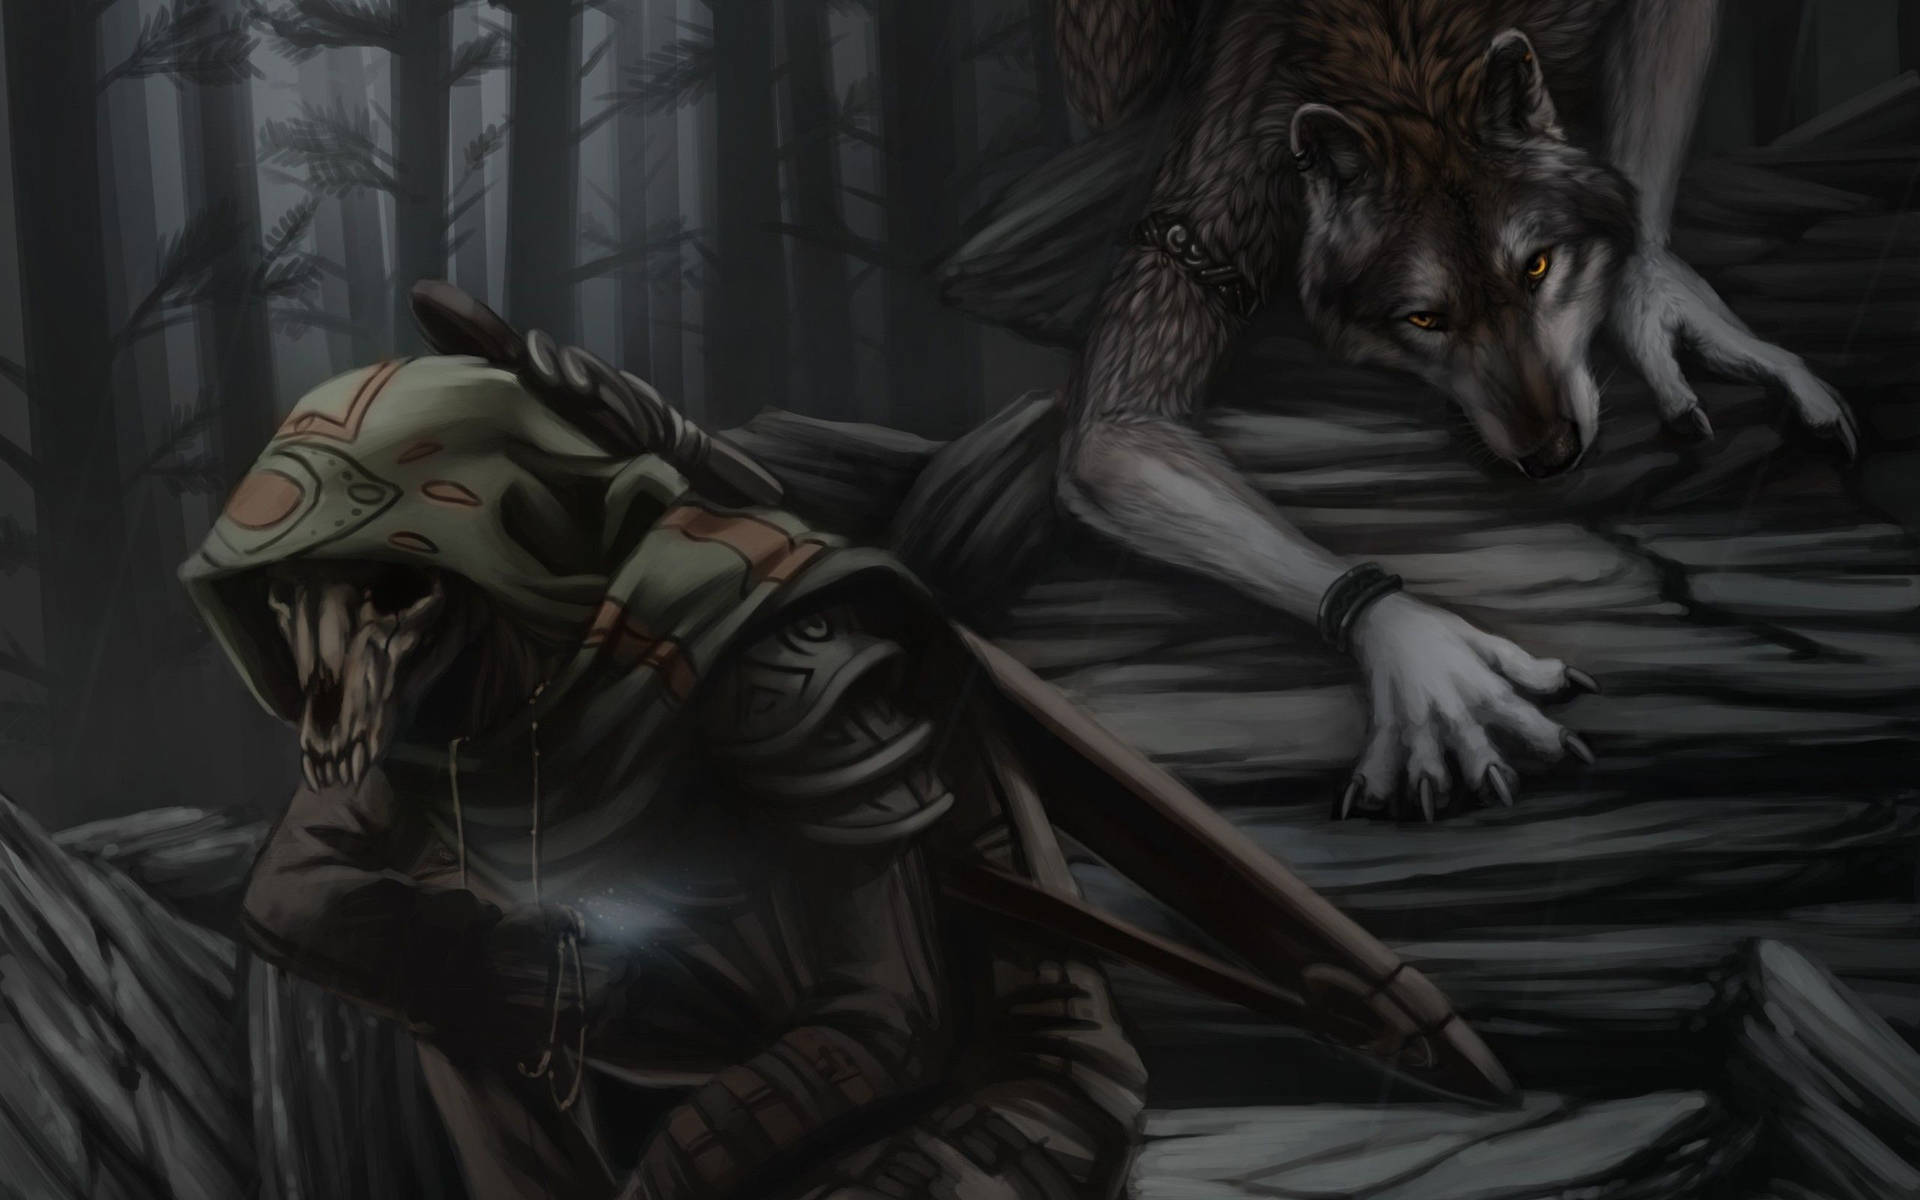 Werewolf and hunter clash over a mysterious skull Wallpaper